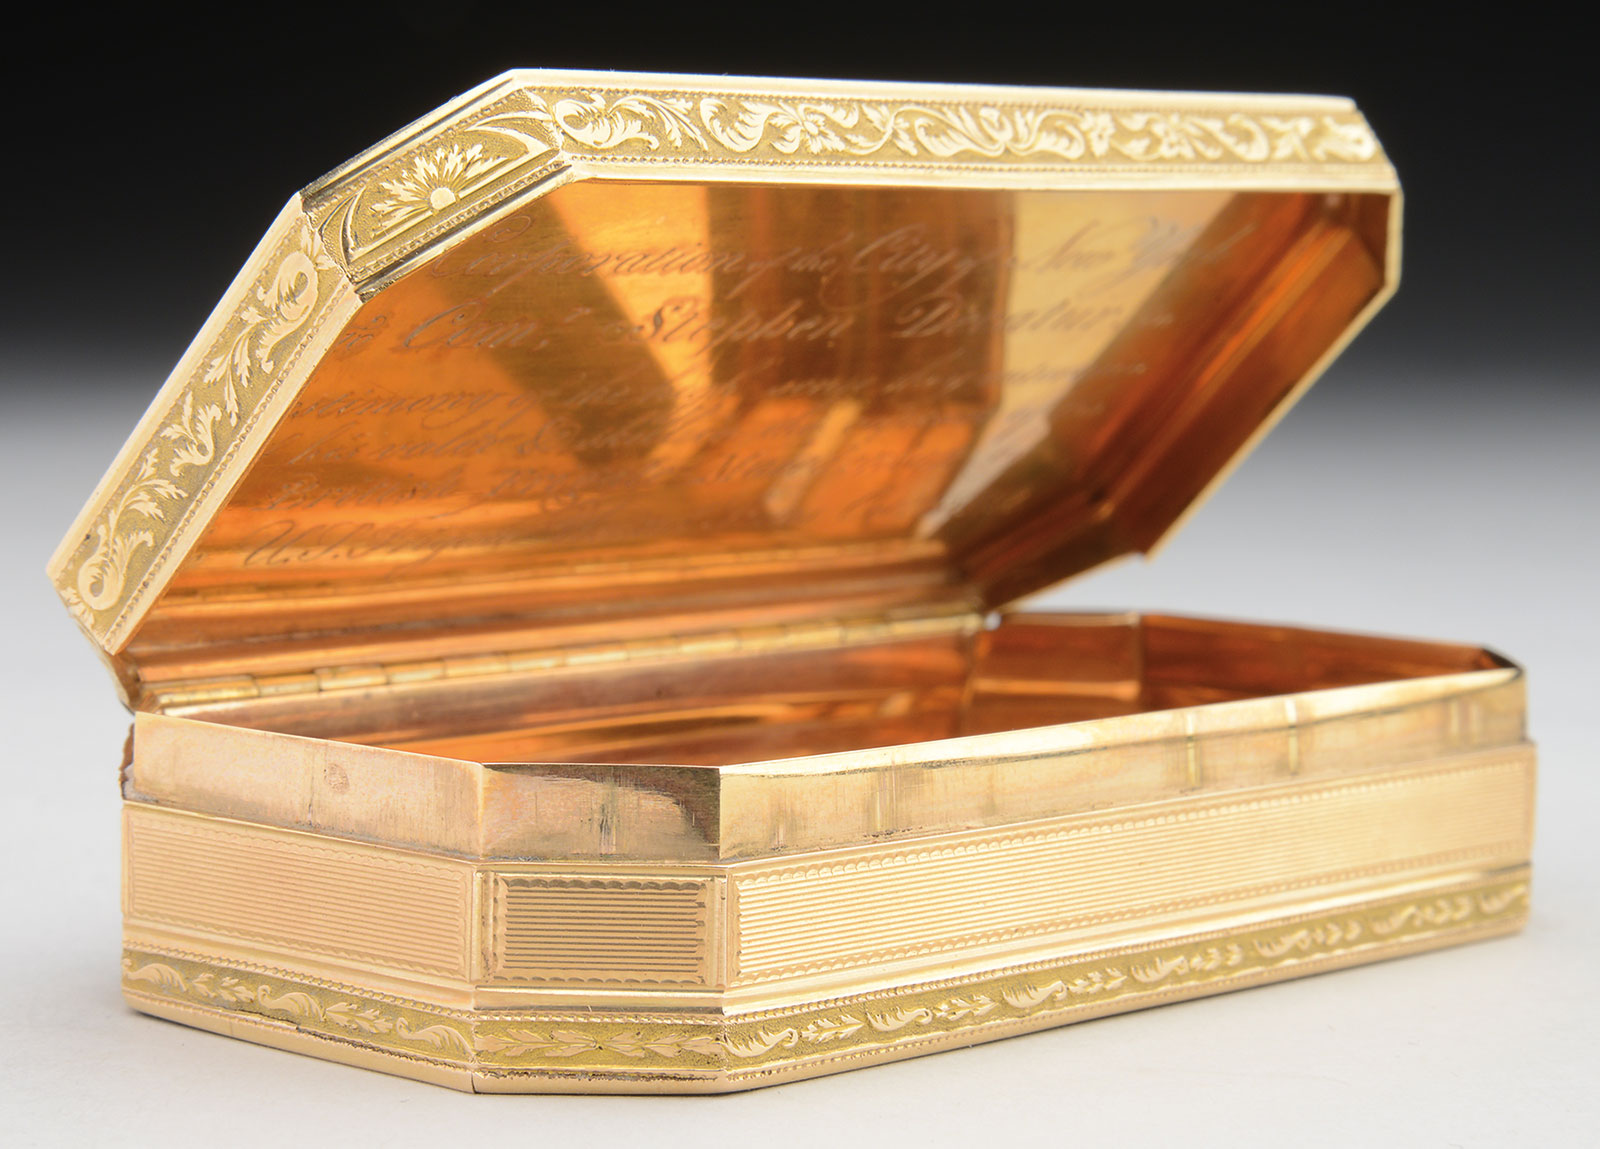 A 18-karat gold freedom box awarded to Commodore Stephen Decatur by the City of New York in 1812. 